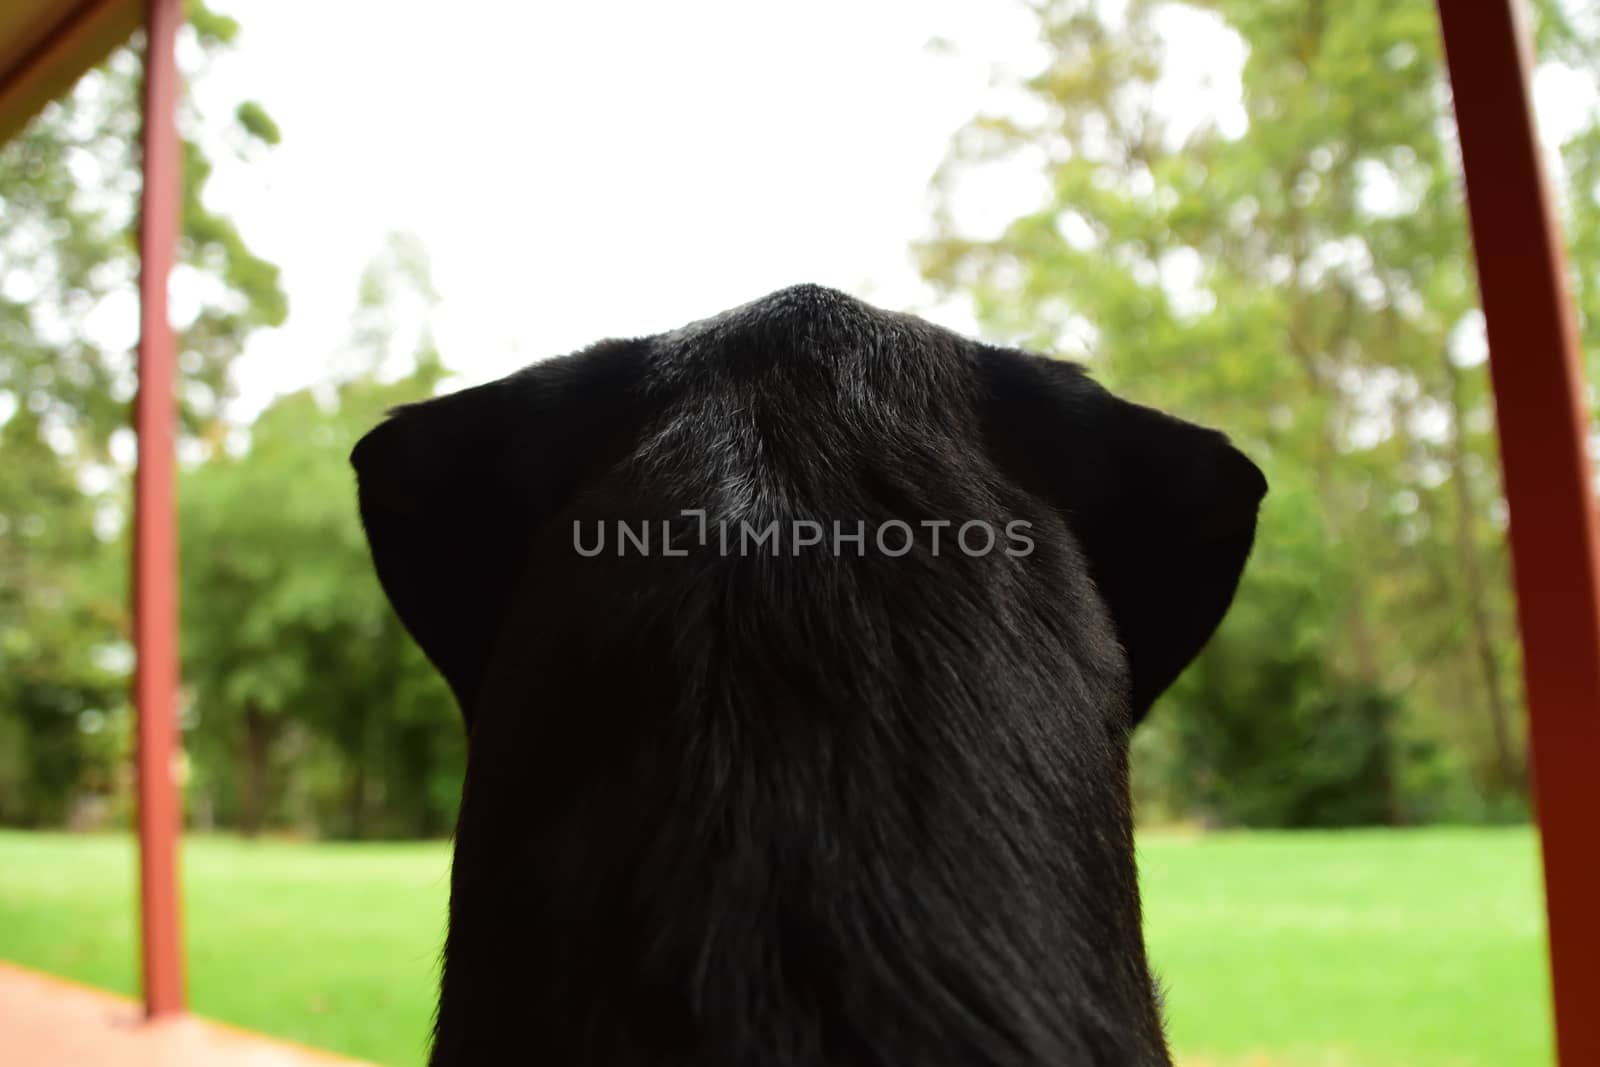 The behind view of a black Labrador sitting down, looking out at the world.